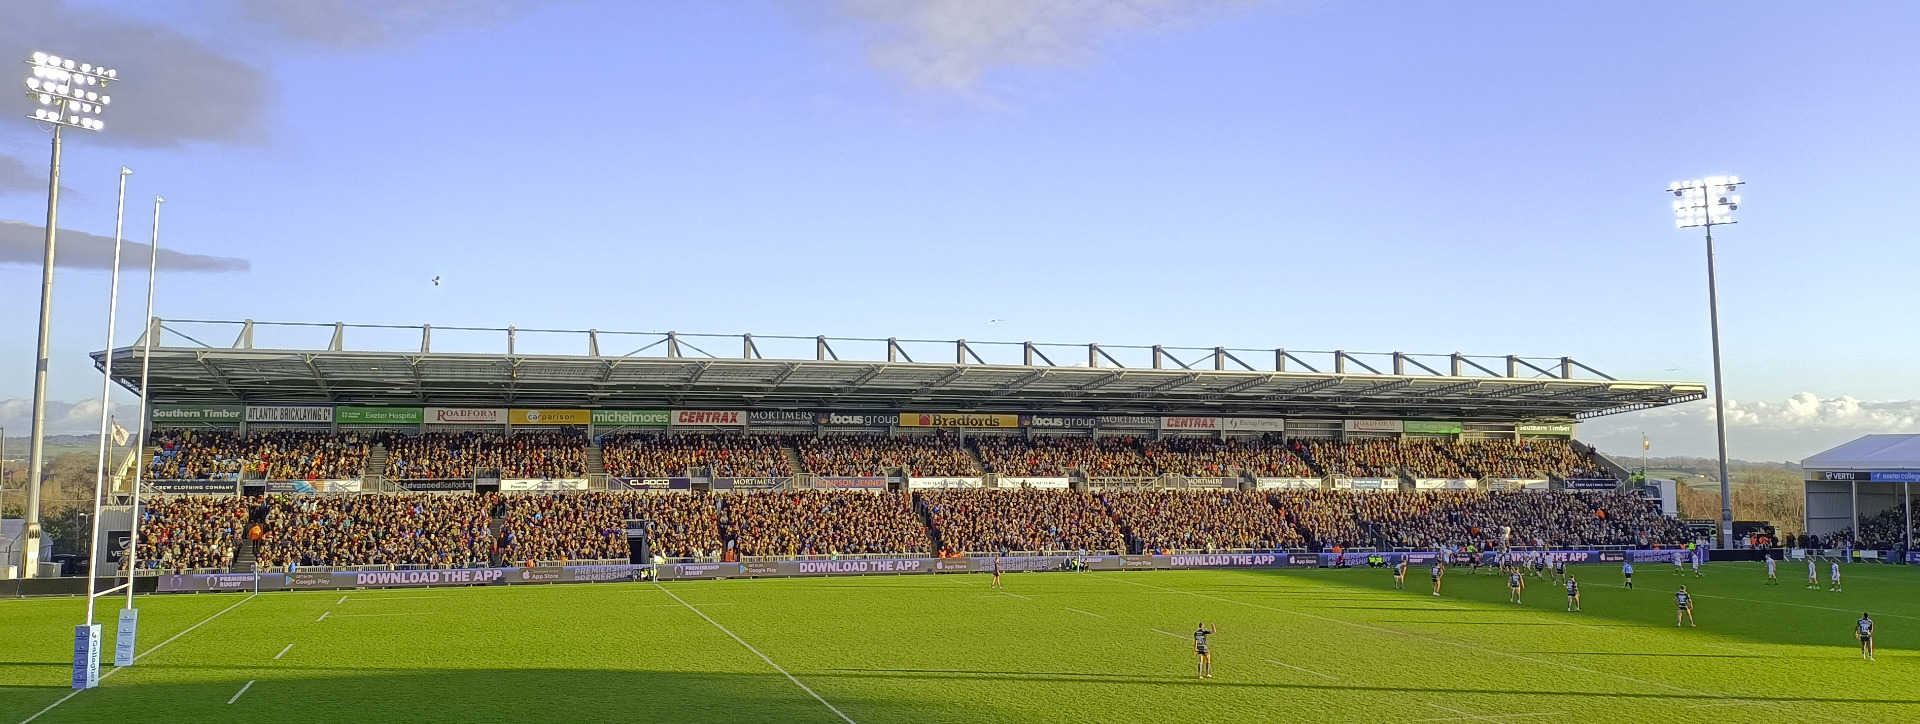 Image of Exeter Chiefs rugby stand featuring Cladco signage.